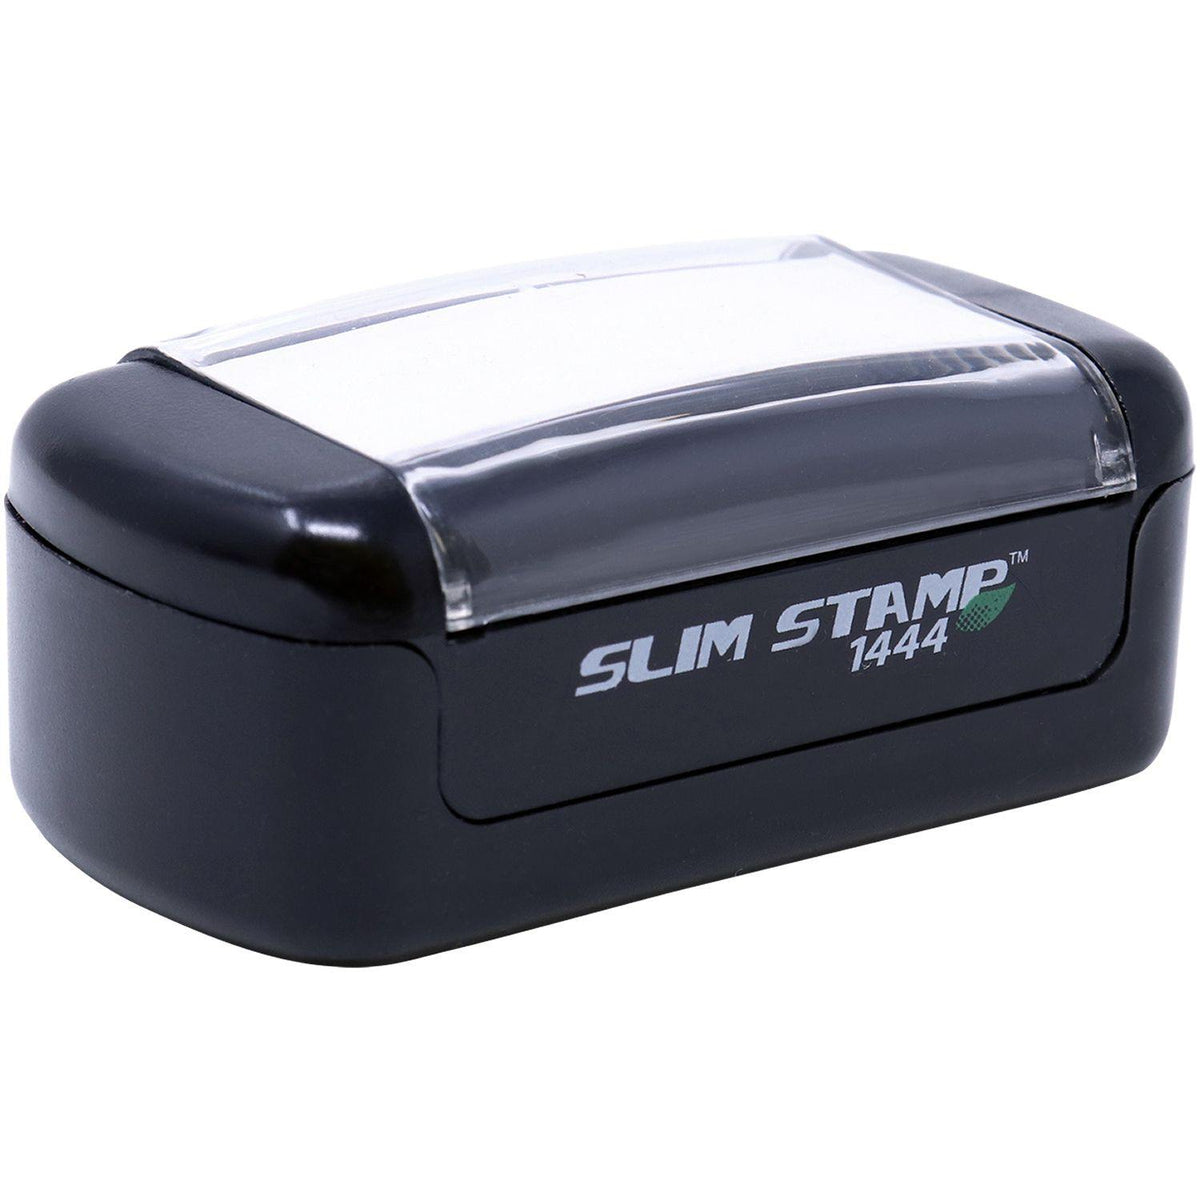 Alt View of Slim Pre Inked Credit Report Stamp Mount Angle